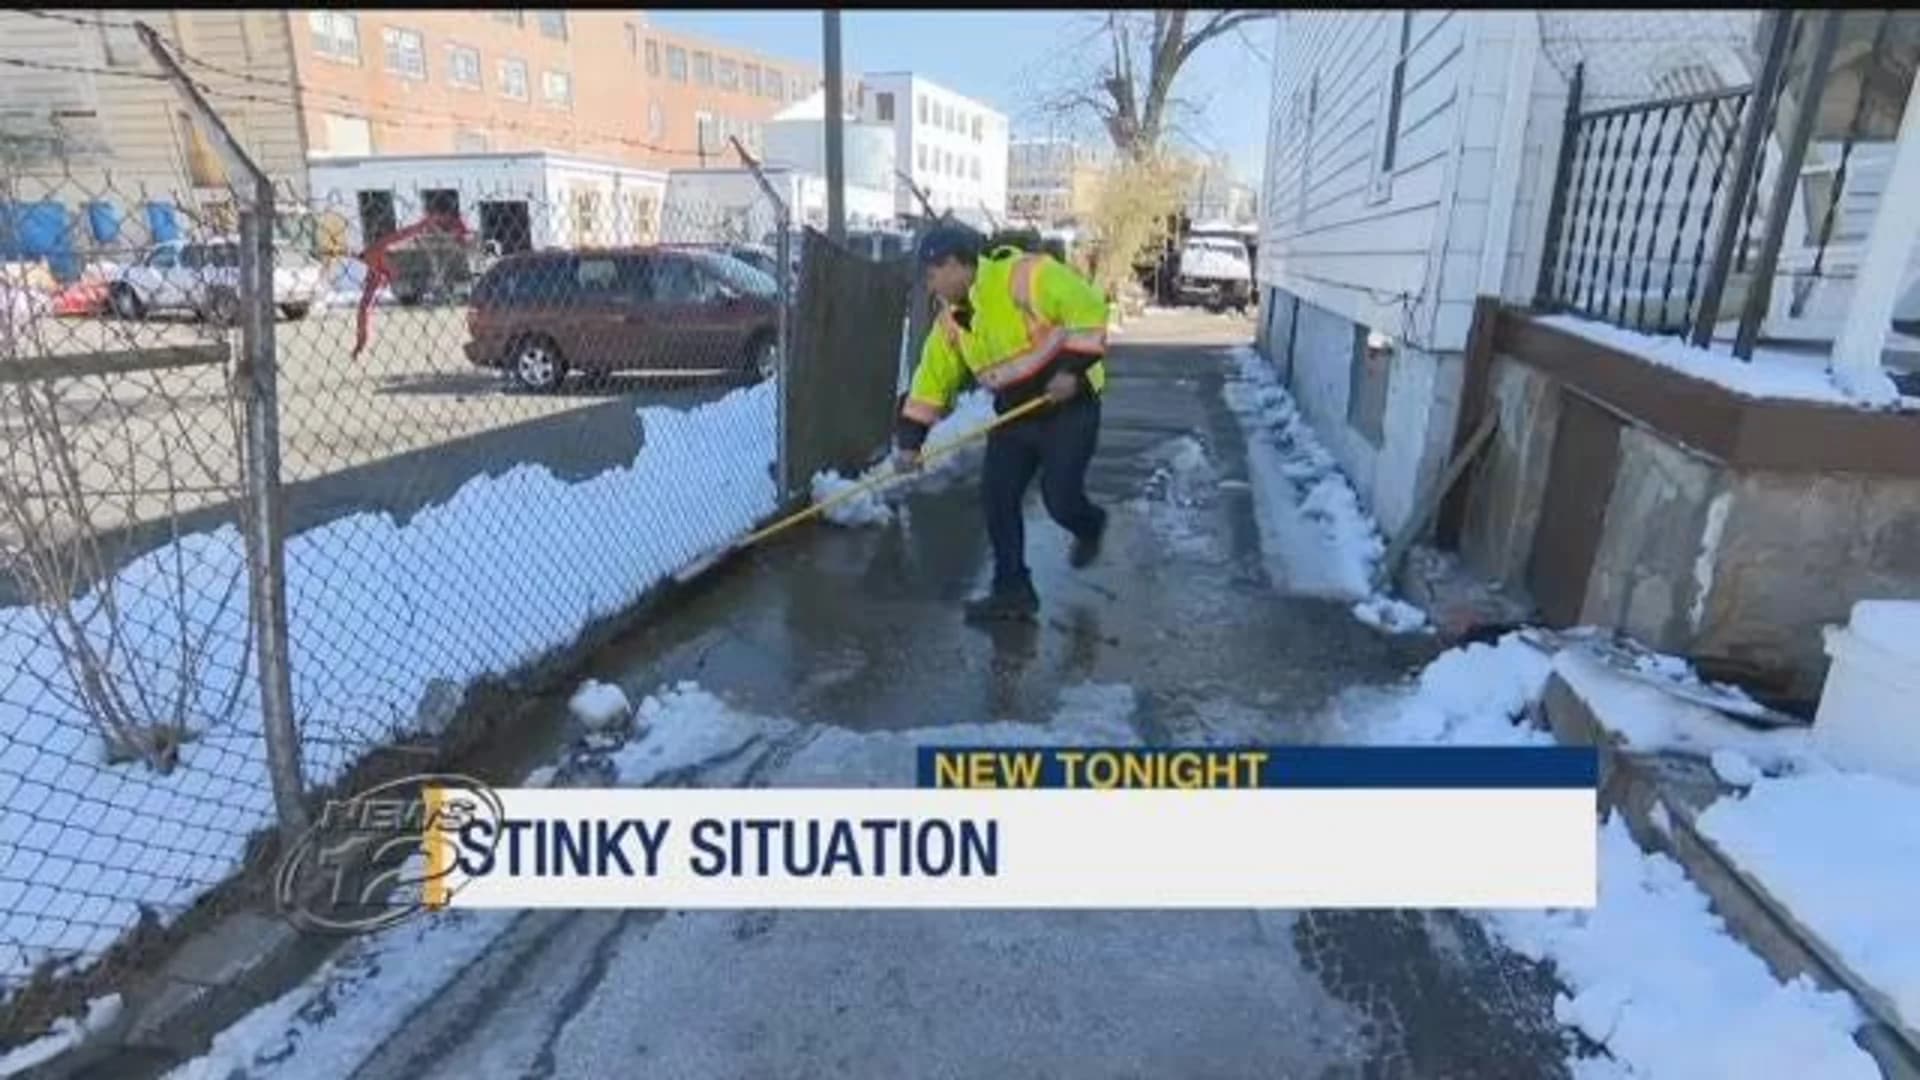 Stinky situation: Homeowners blame Con Ed for sewage issues